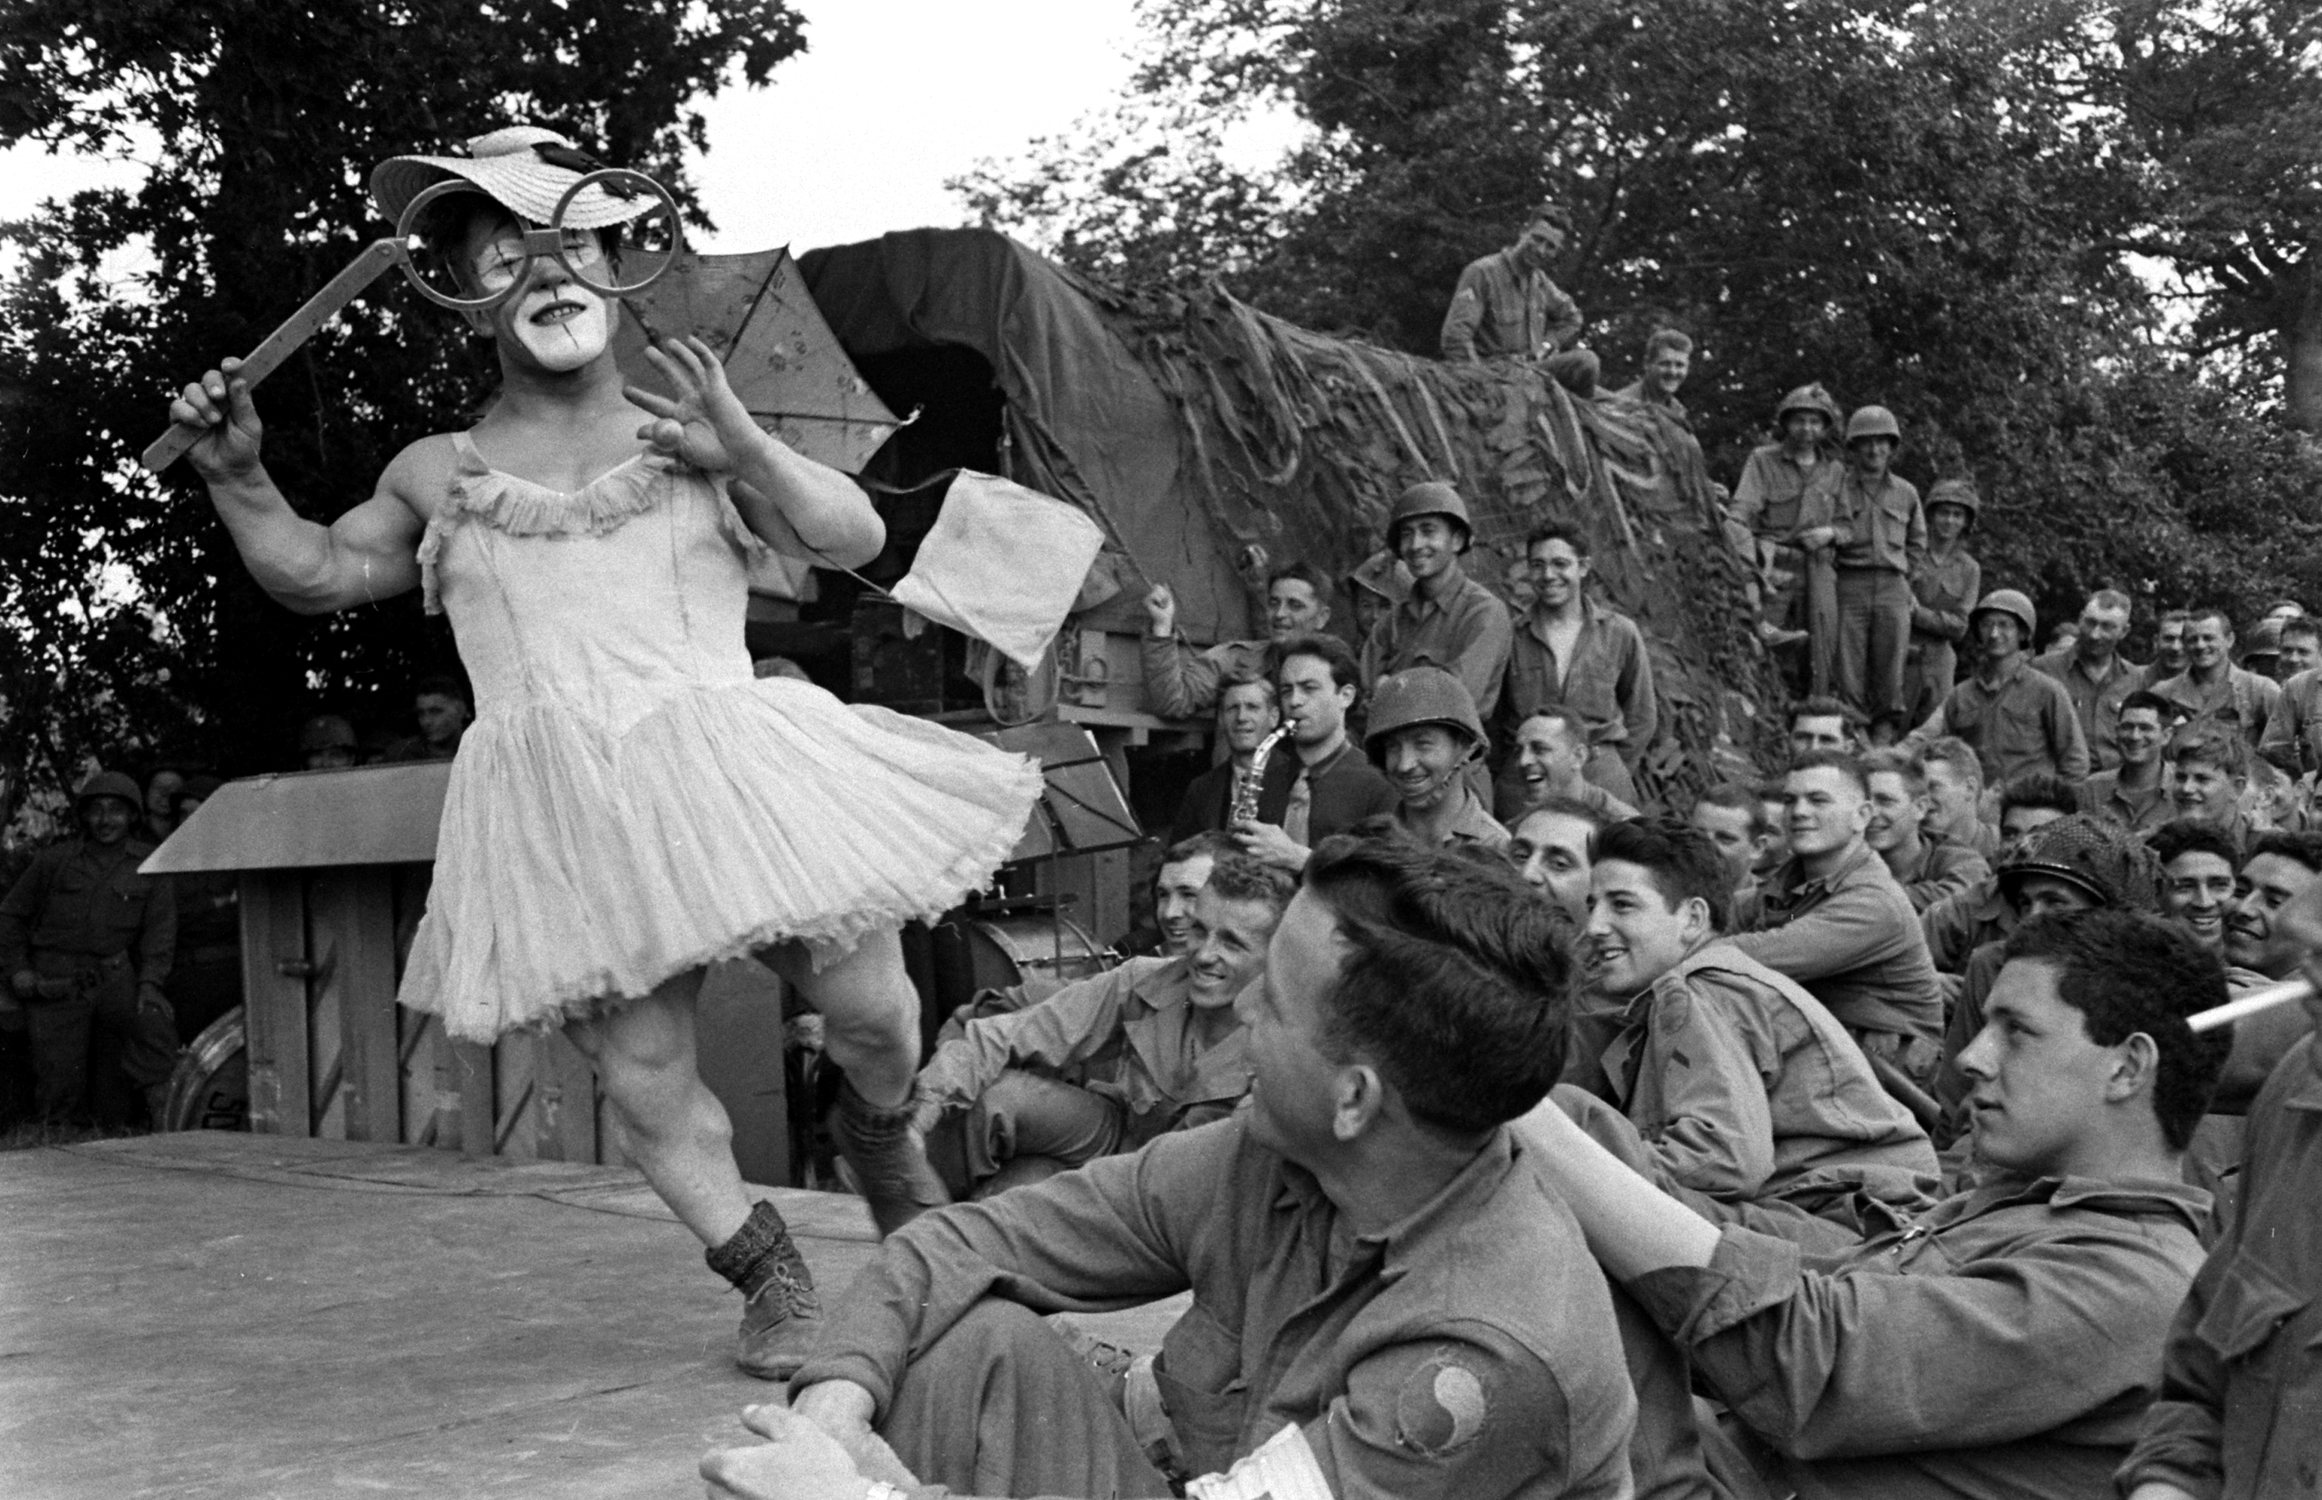 First organized show for American troops after D-Day, Normandy, July 1944.